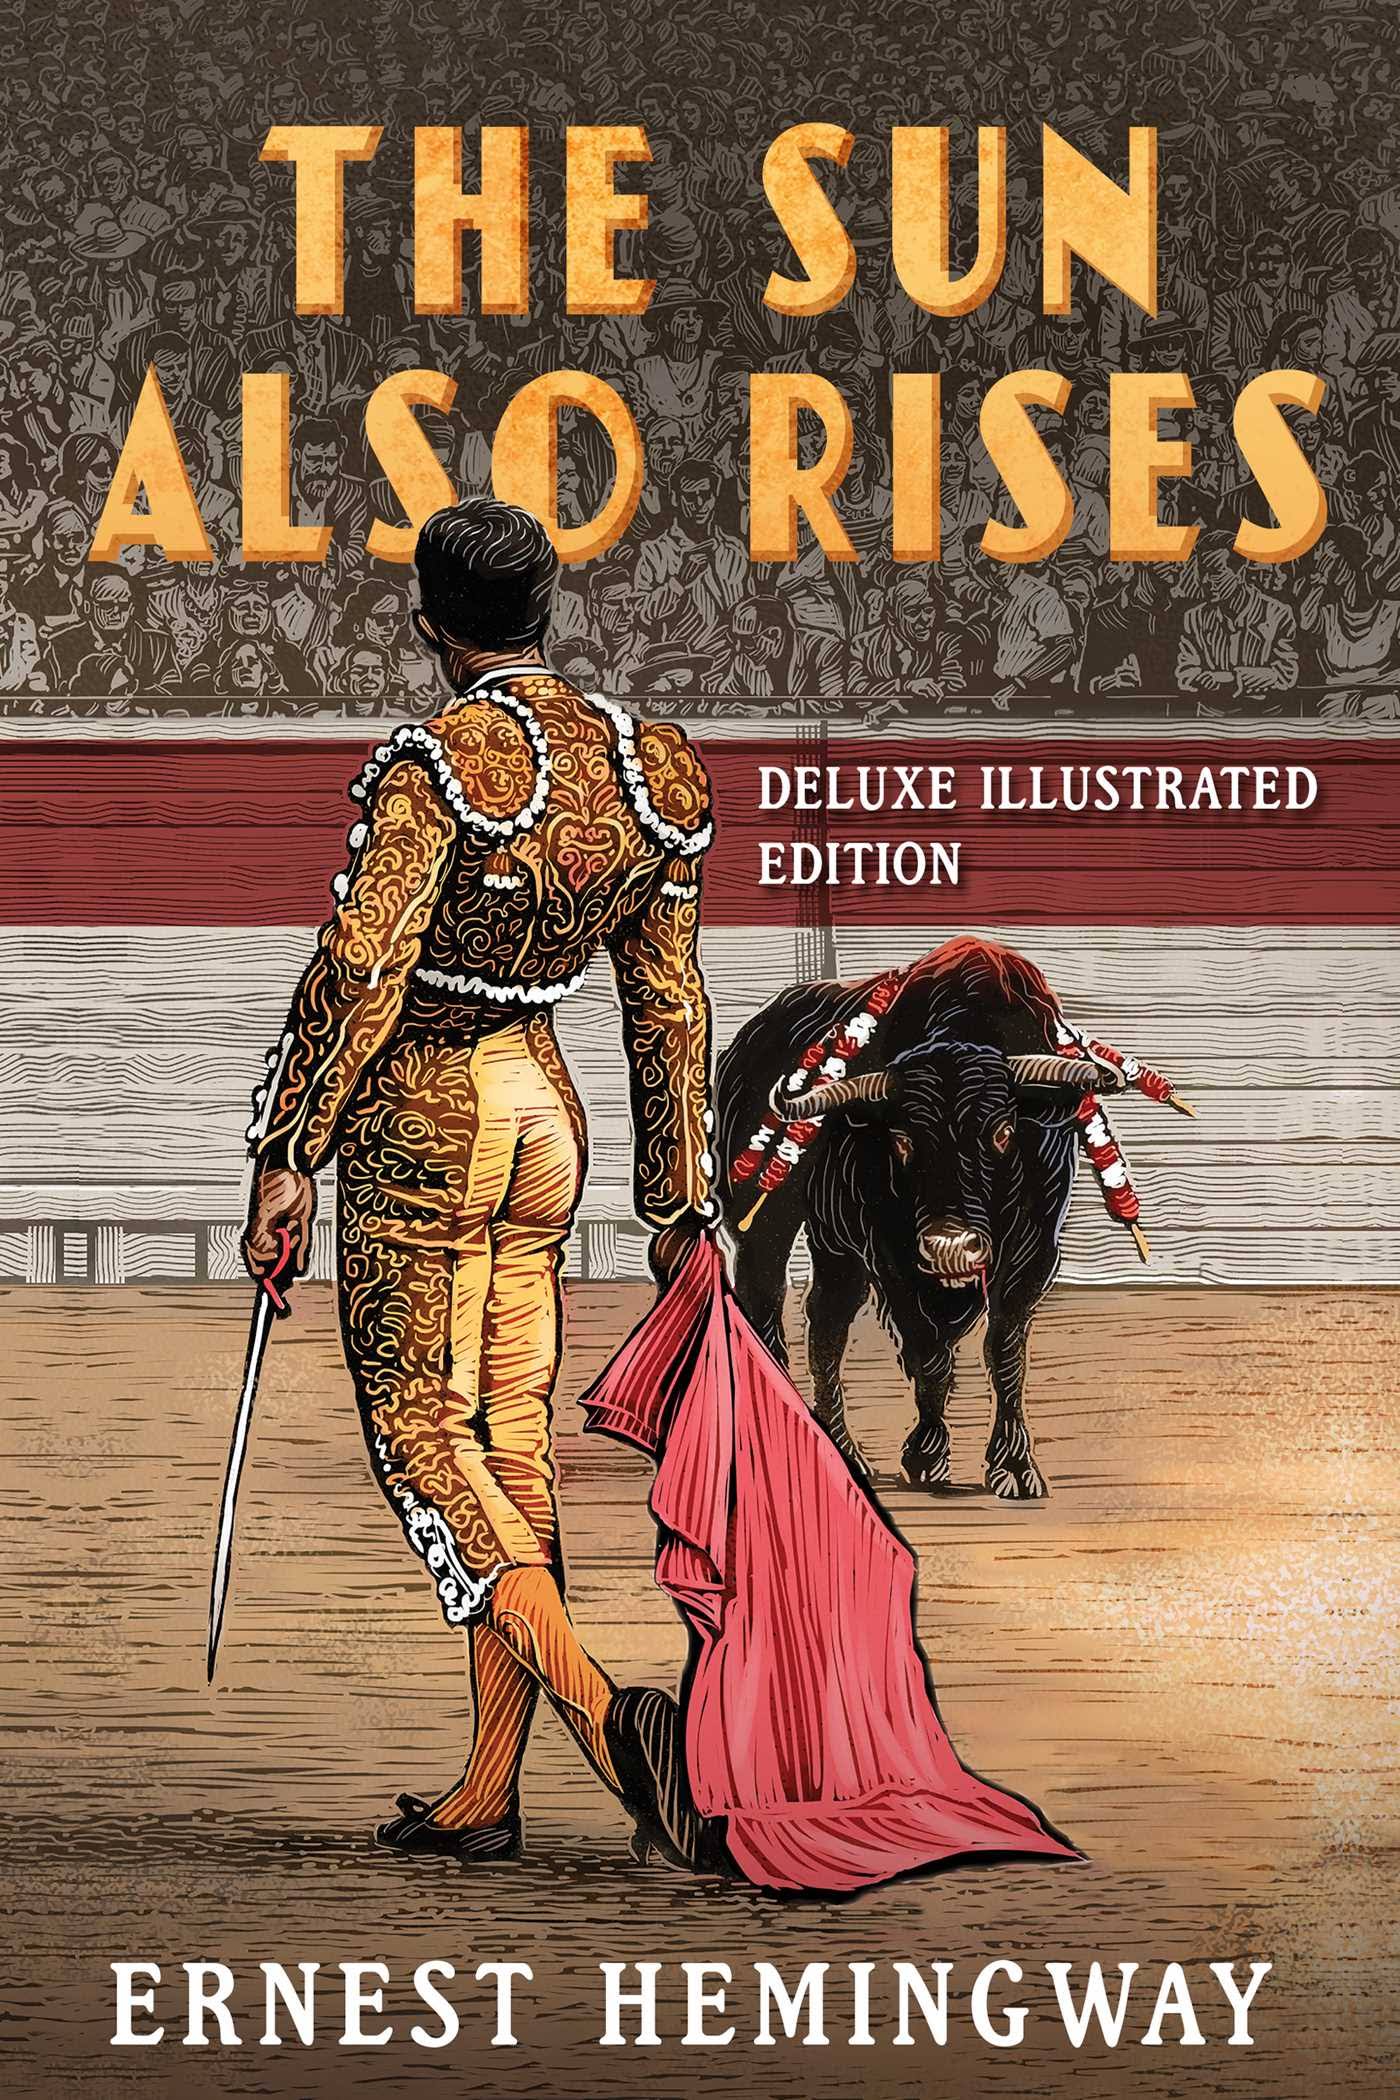 The Sun Also Rises: Deluxe Illustrated Edition [Book]